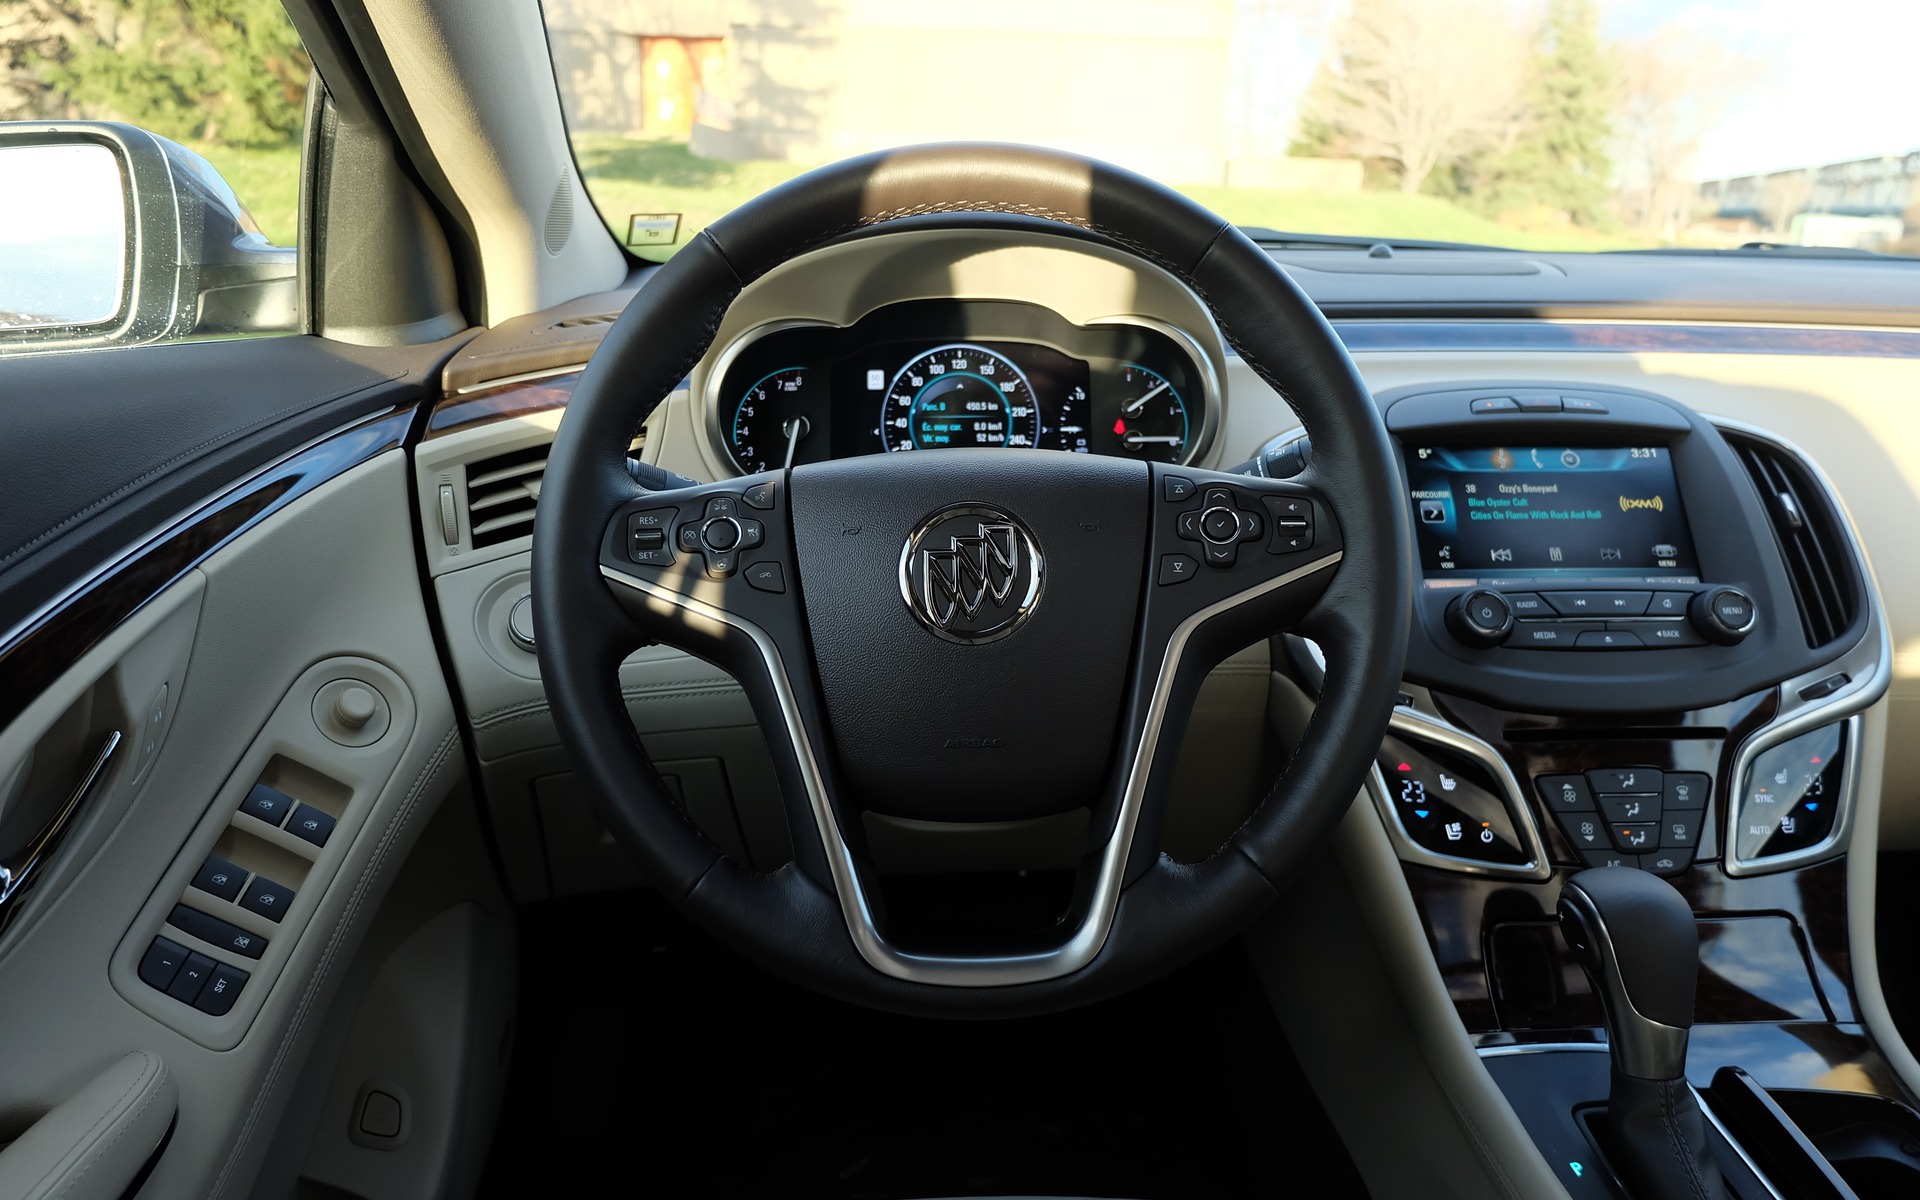 The steering wheel is comfortable and its controls are nicely laid out.